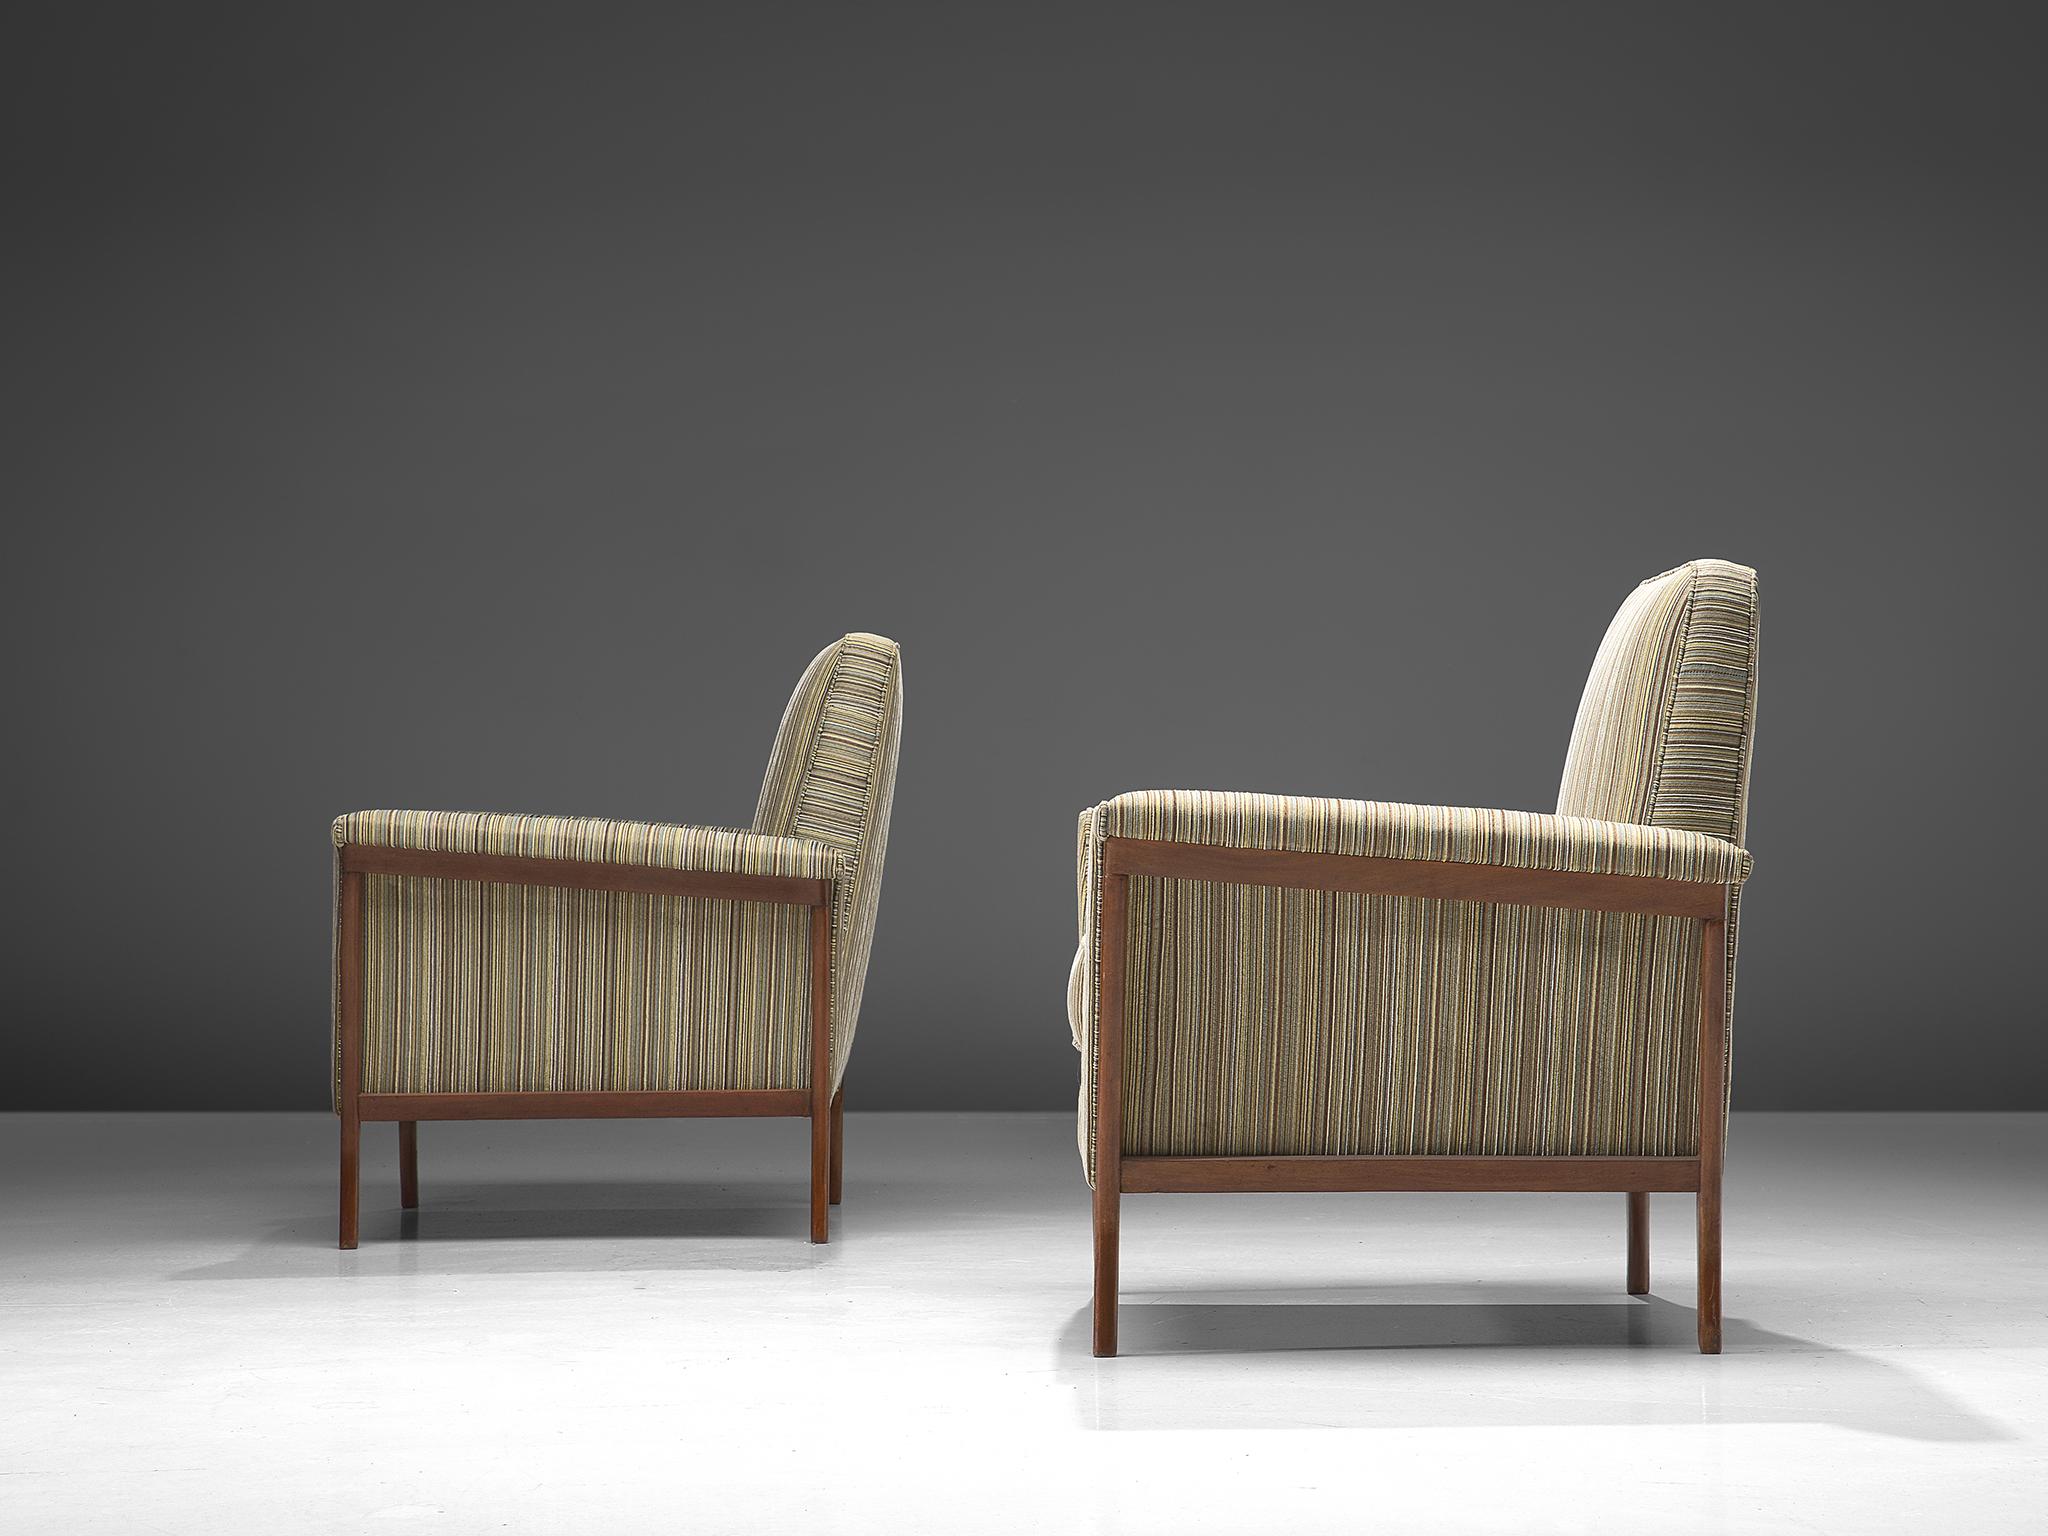 Fabric Brazilian Pair of Lounge Chairs in Mahogany and Striped Upholstery For Sale